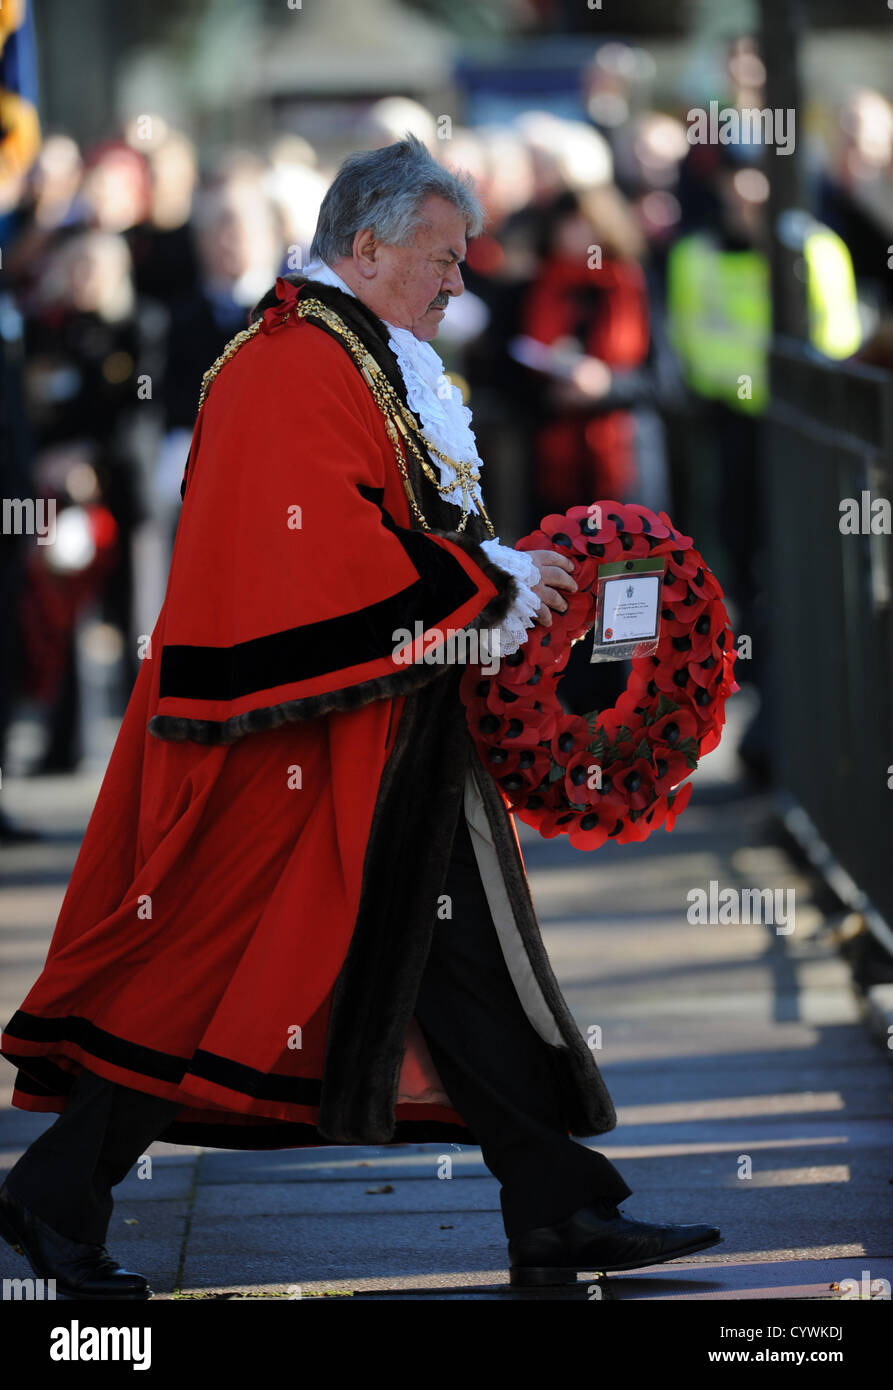 Brighton Sussex UK 11 November 2012 - The Mayor of Brighton and Hove Cllr Bill Randall lays a wreath at the Act of Remembrance service in Brighton this morning Alamy Live News Stock Photo